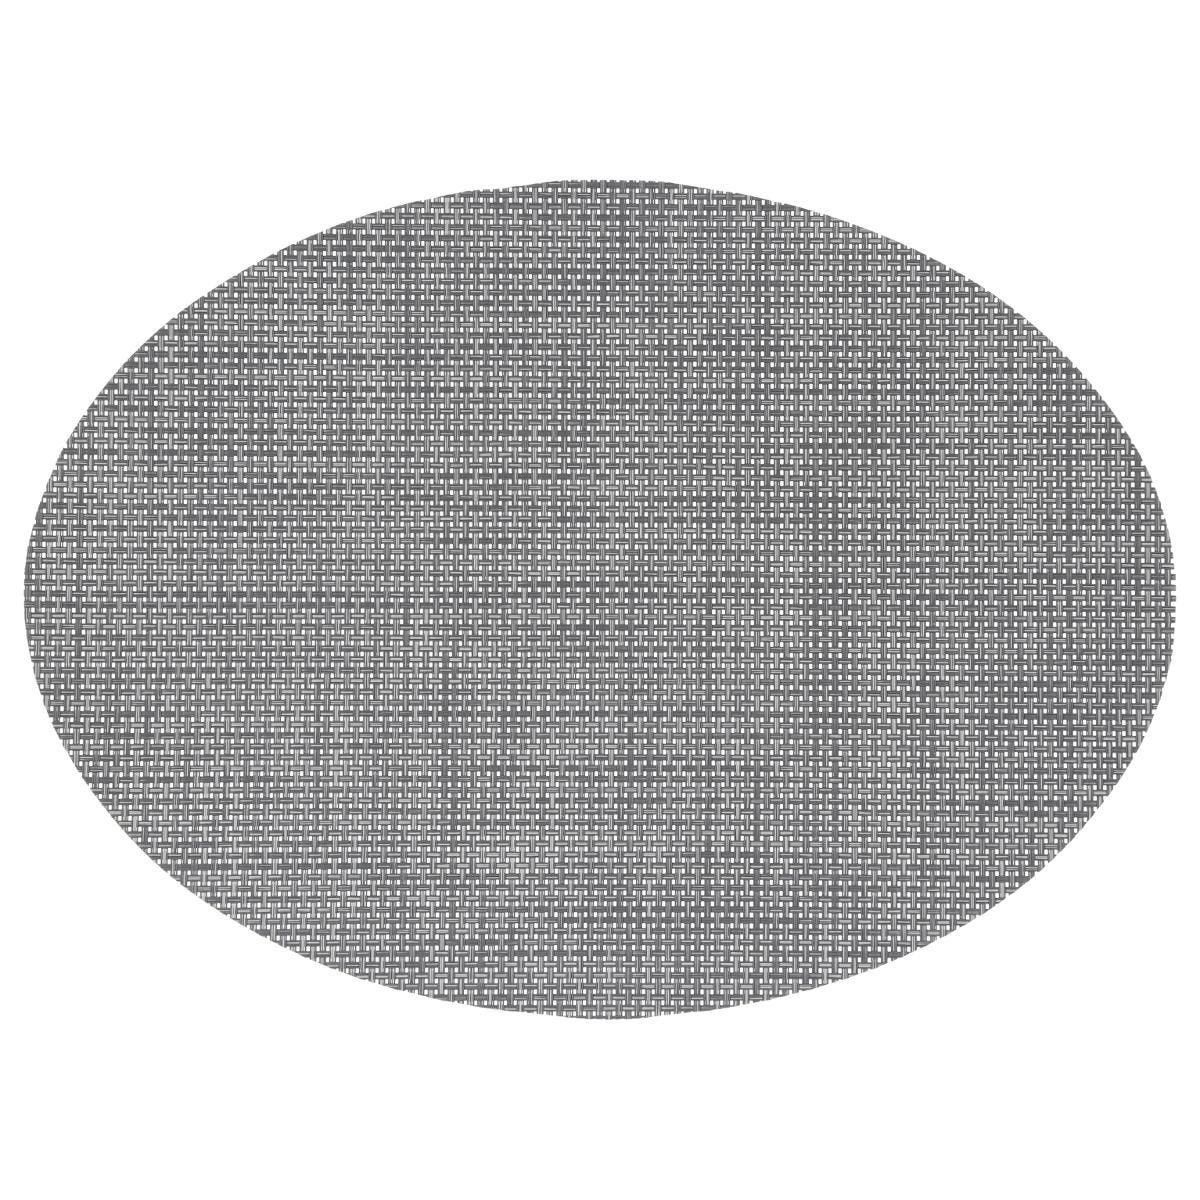 Ovale placemat Maoli taupe kunststof 48 x 35 cm